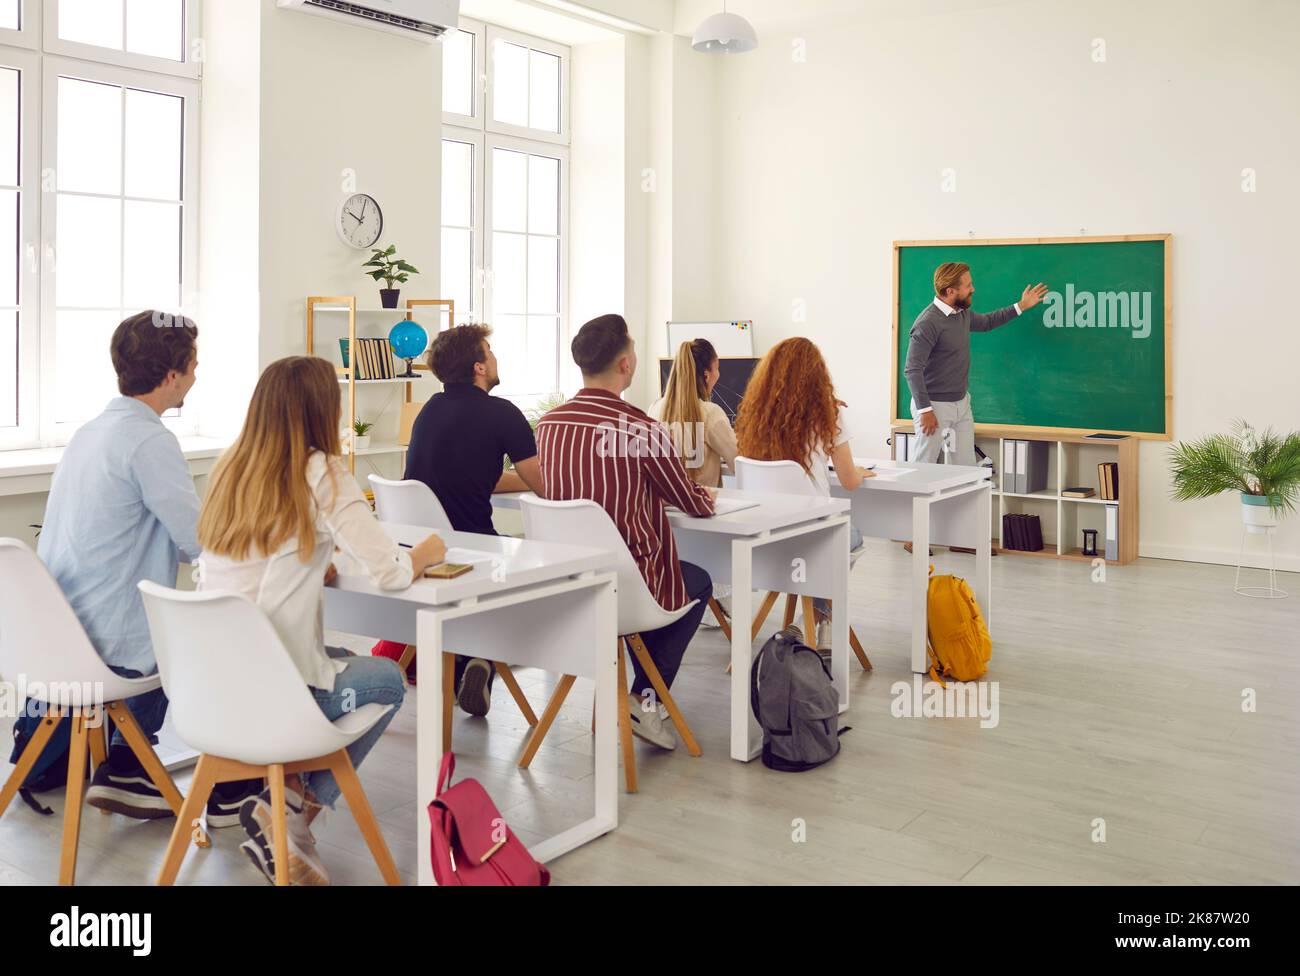 Group of students enthusiastically and attentively listens to professor explaining theme using green chalkboard. Stock Photo